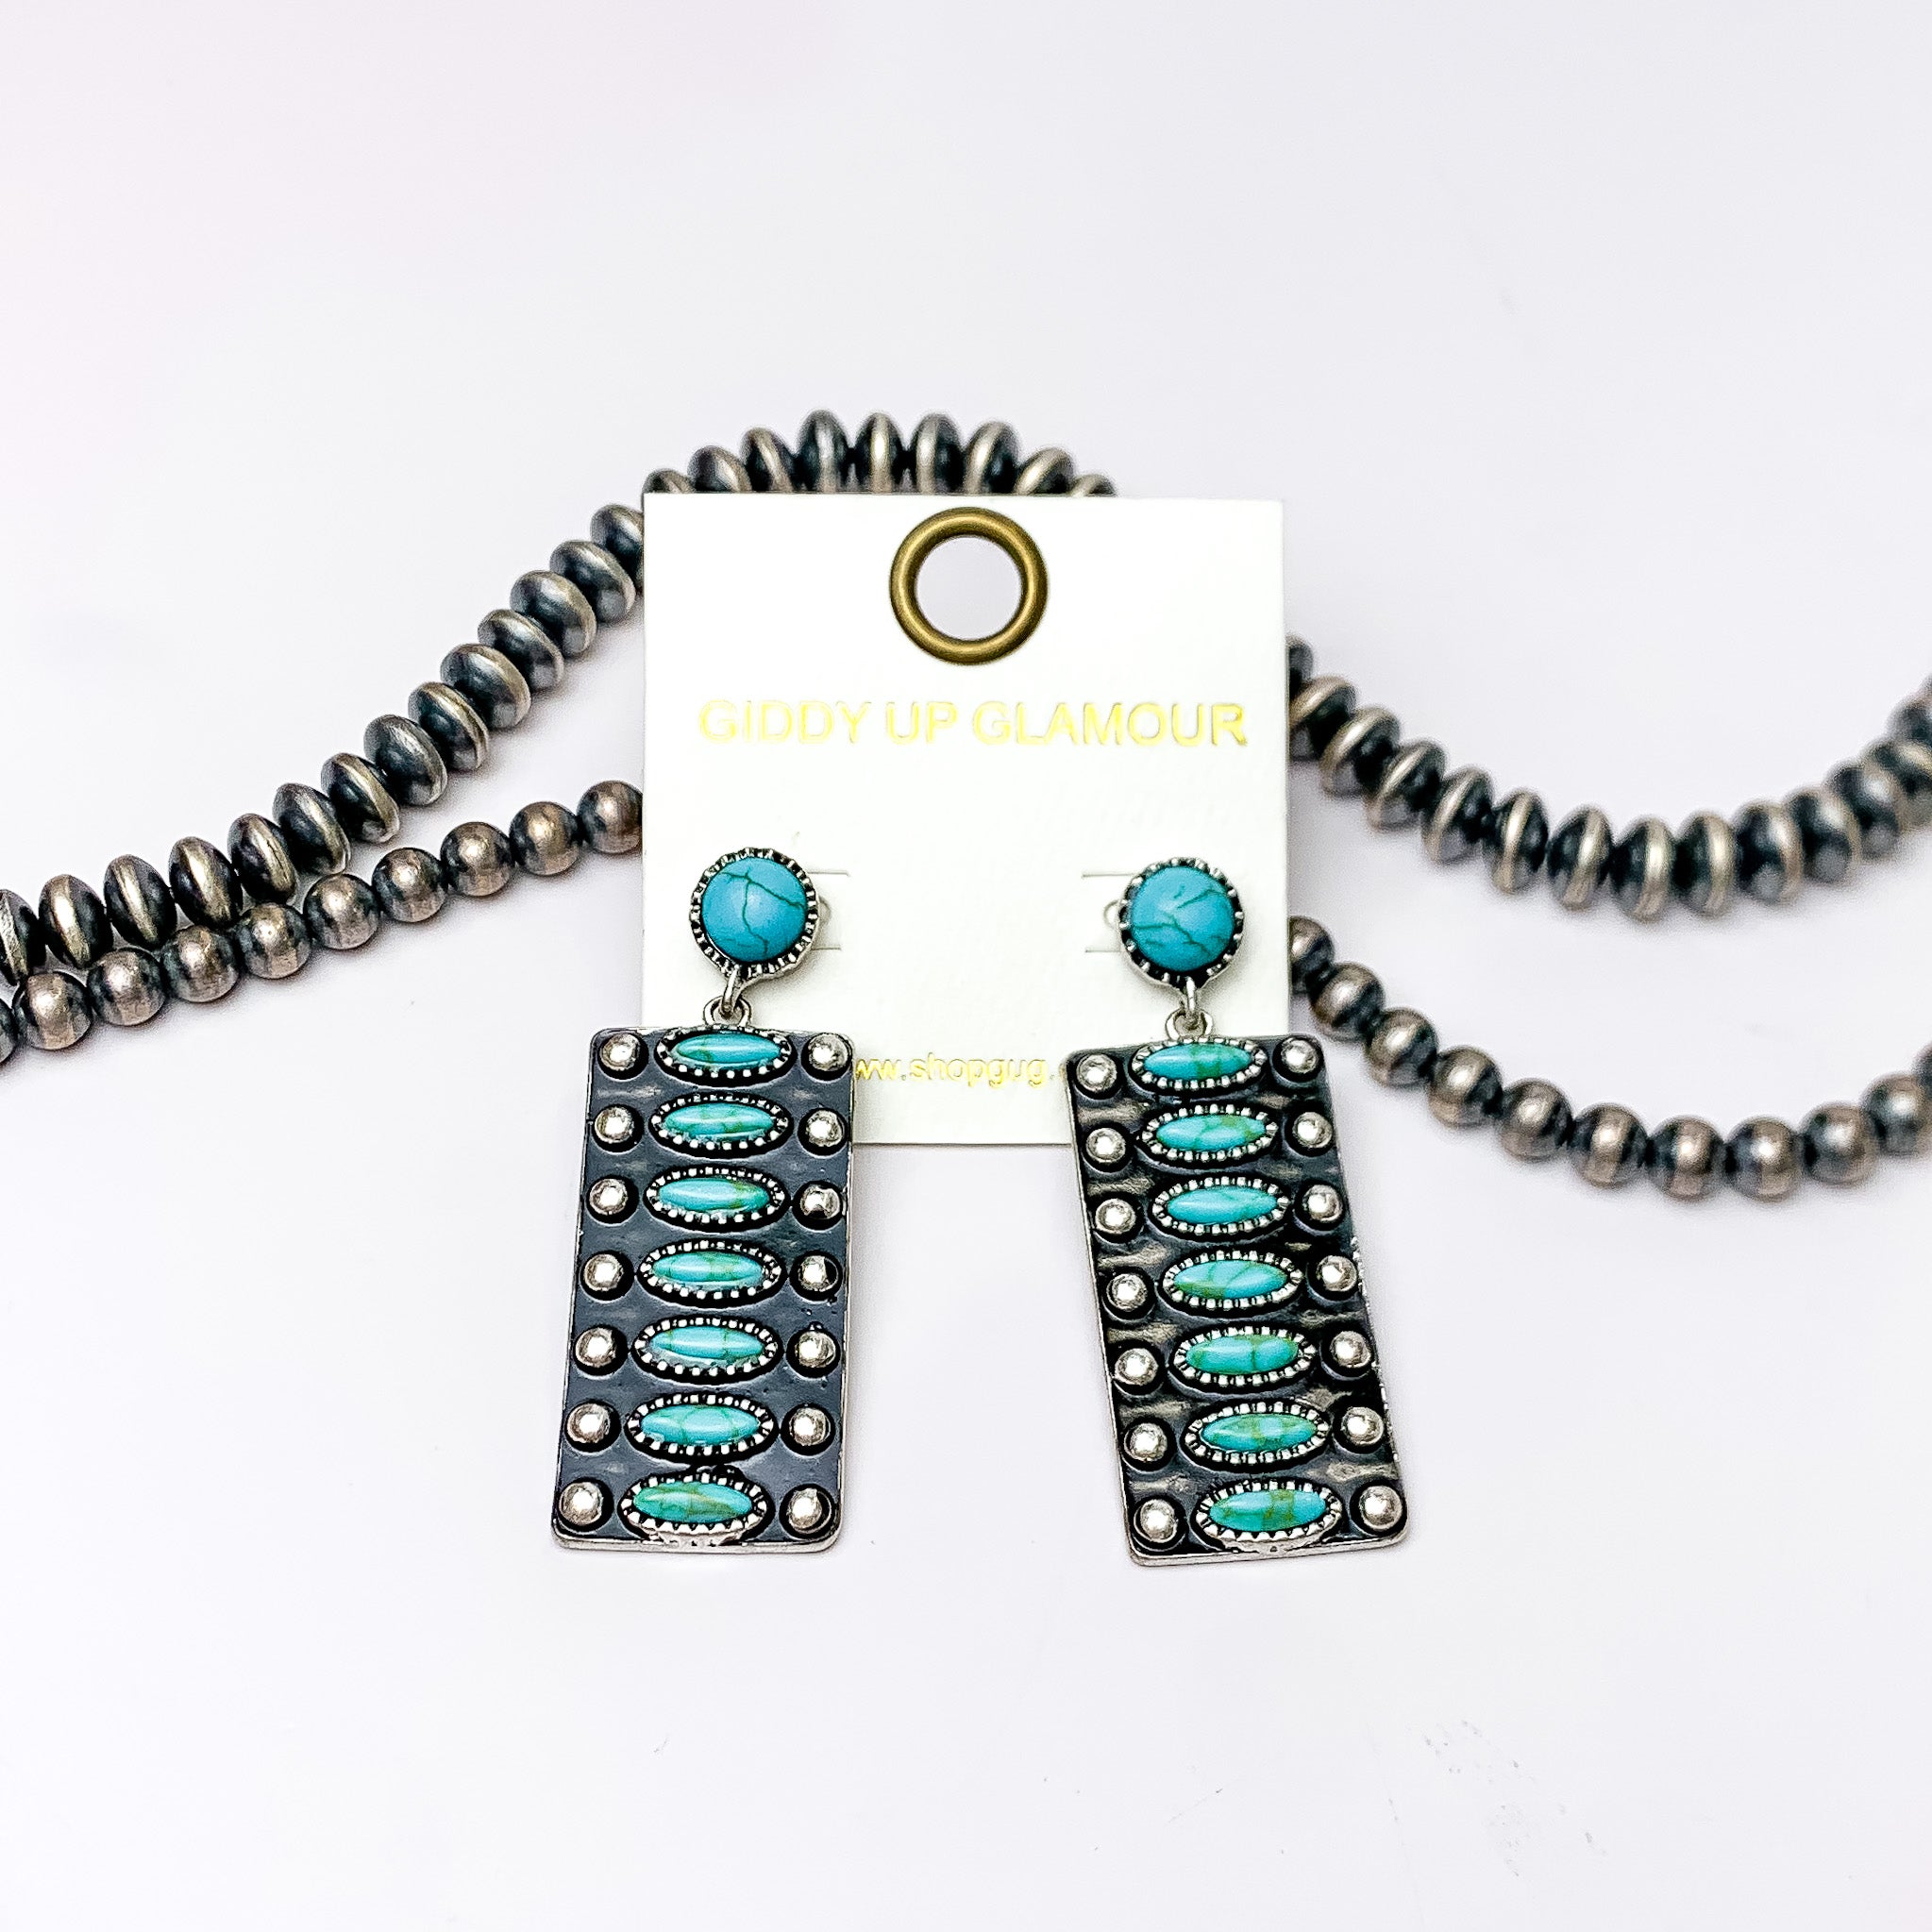 Circle, turquoise post back earrings with a rectangle drop pendant. The rectangle pendant has seven oval turquoise stones. These earrings are pictured on a white background with silver beads at the top of the picture. 